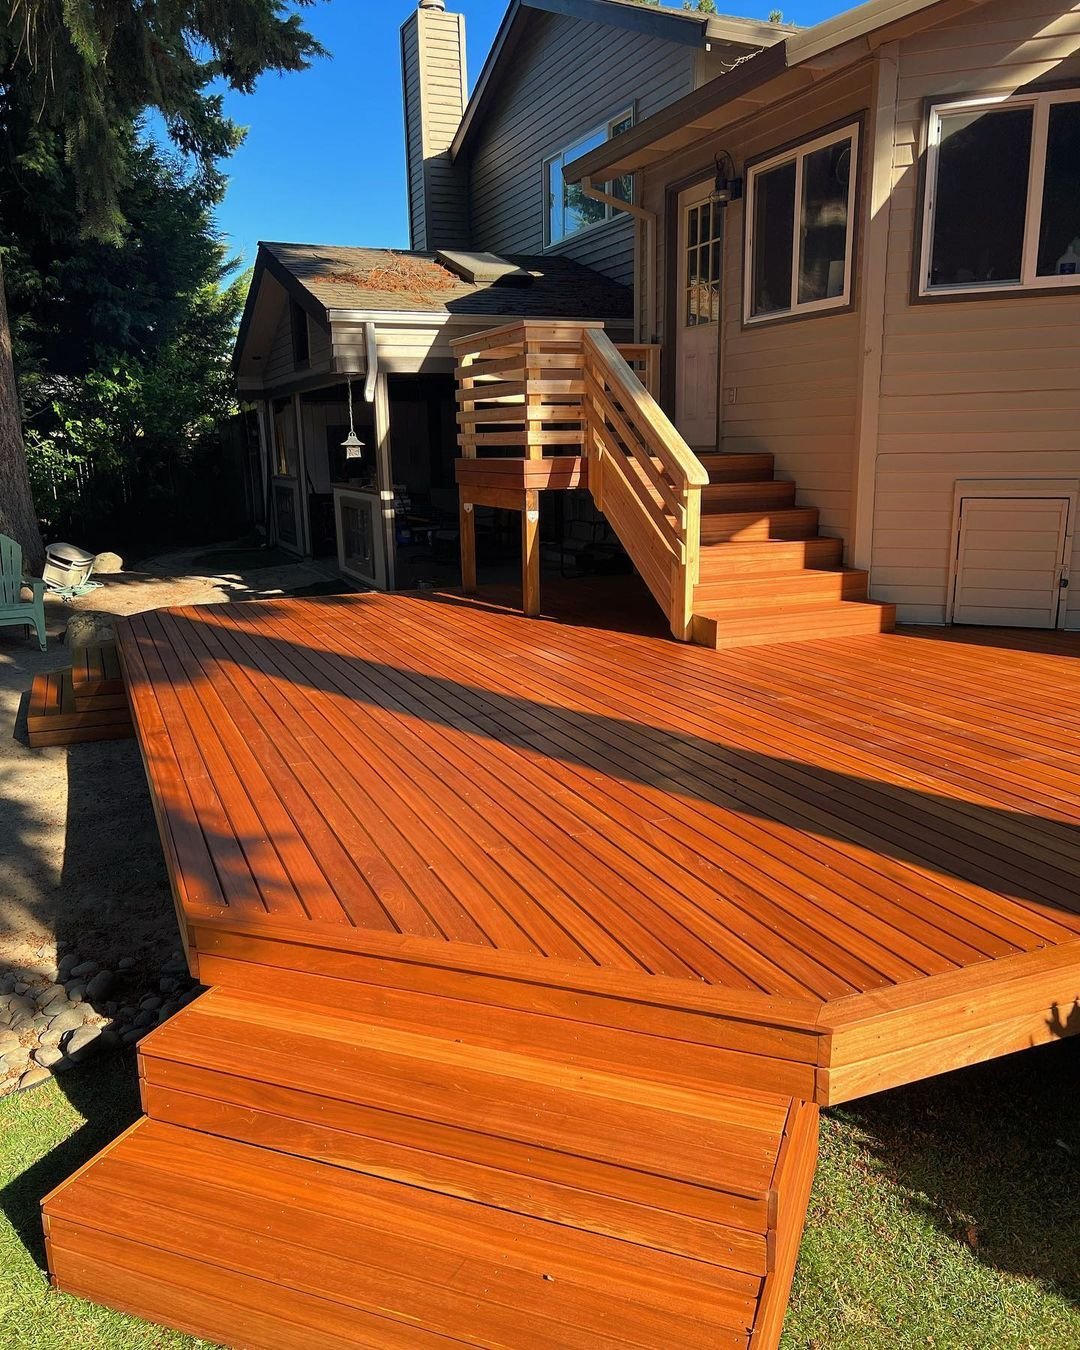 Deck and yard building in Oregon.